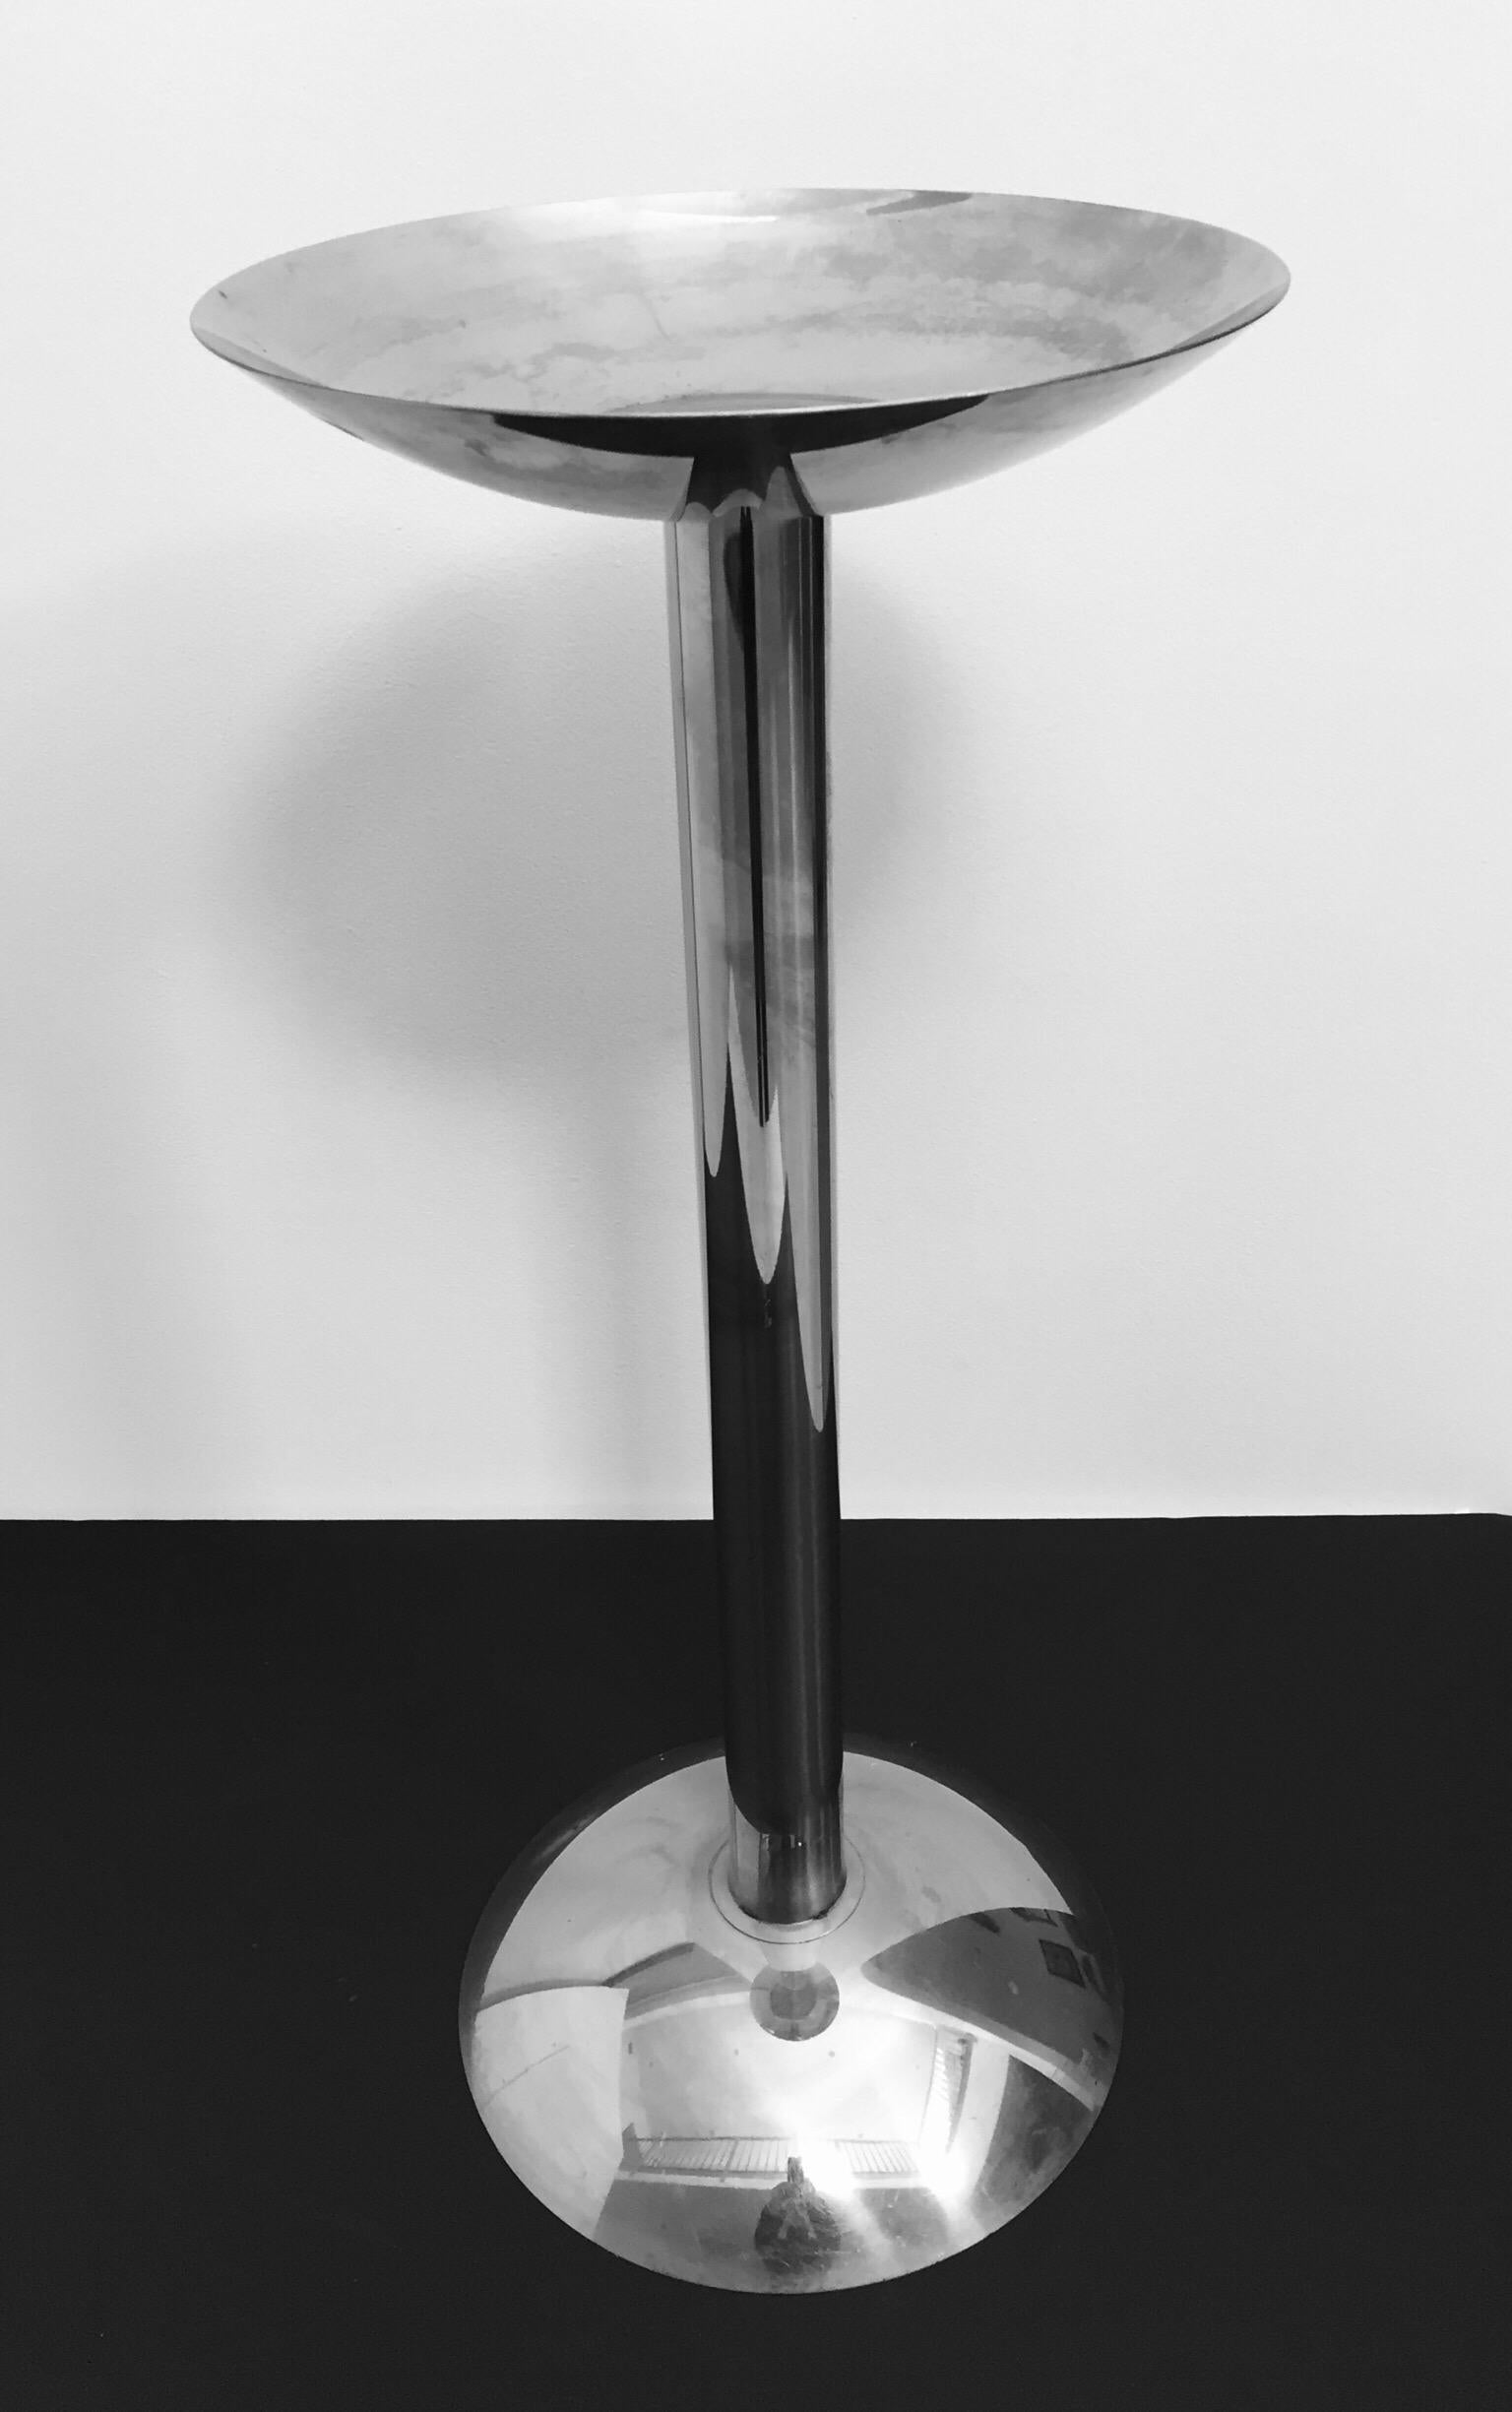 Architectural tall minimalist standing floor chromed standing ashtray ash stand
Modern Space Age Mad Men tulip ashtray in the style of  Eero Saarinen for Knoll.
The stainless steel ashtray basin rests atop the iconic tulip base made stainless